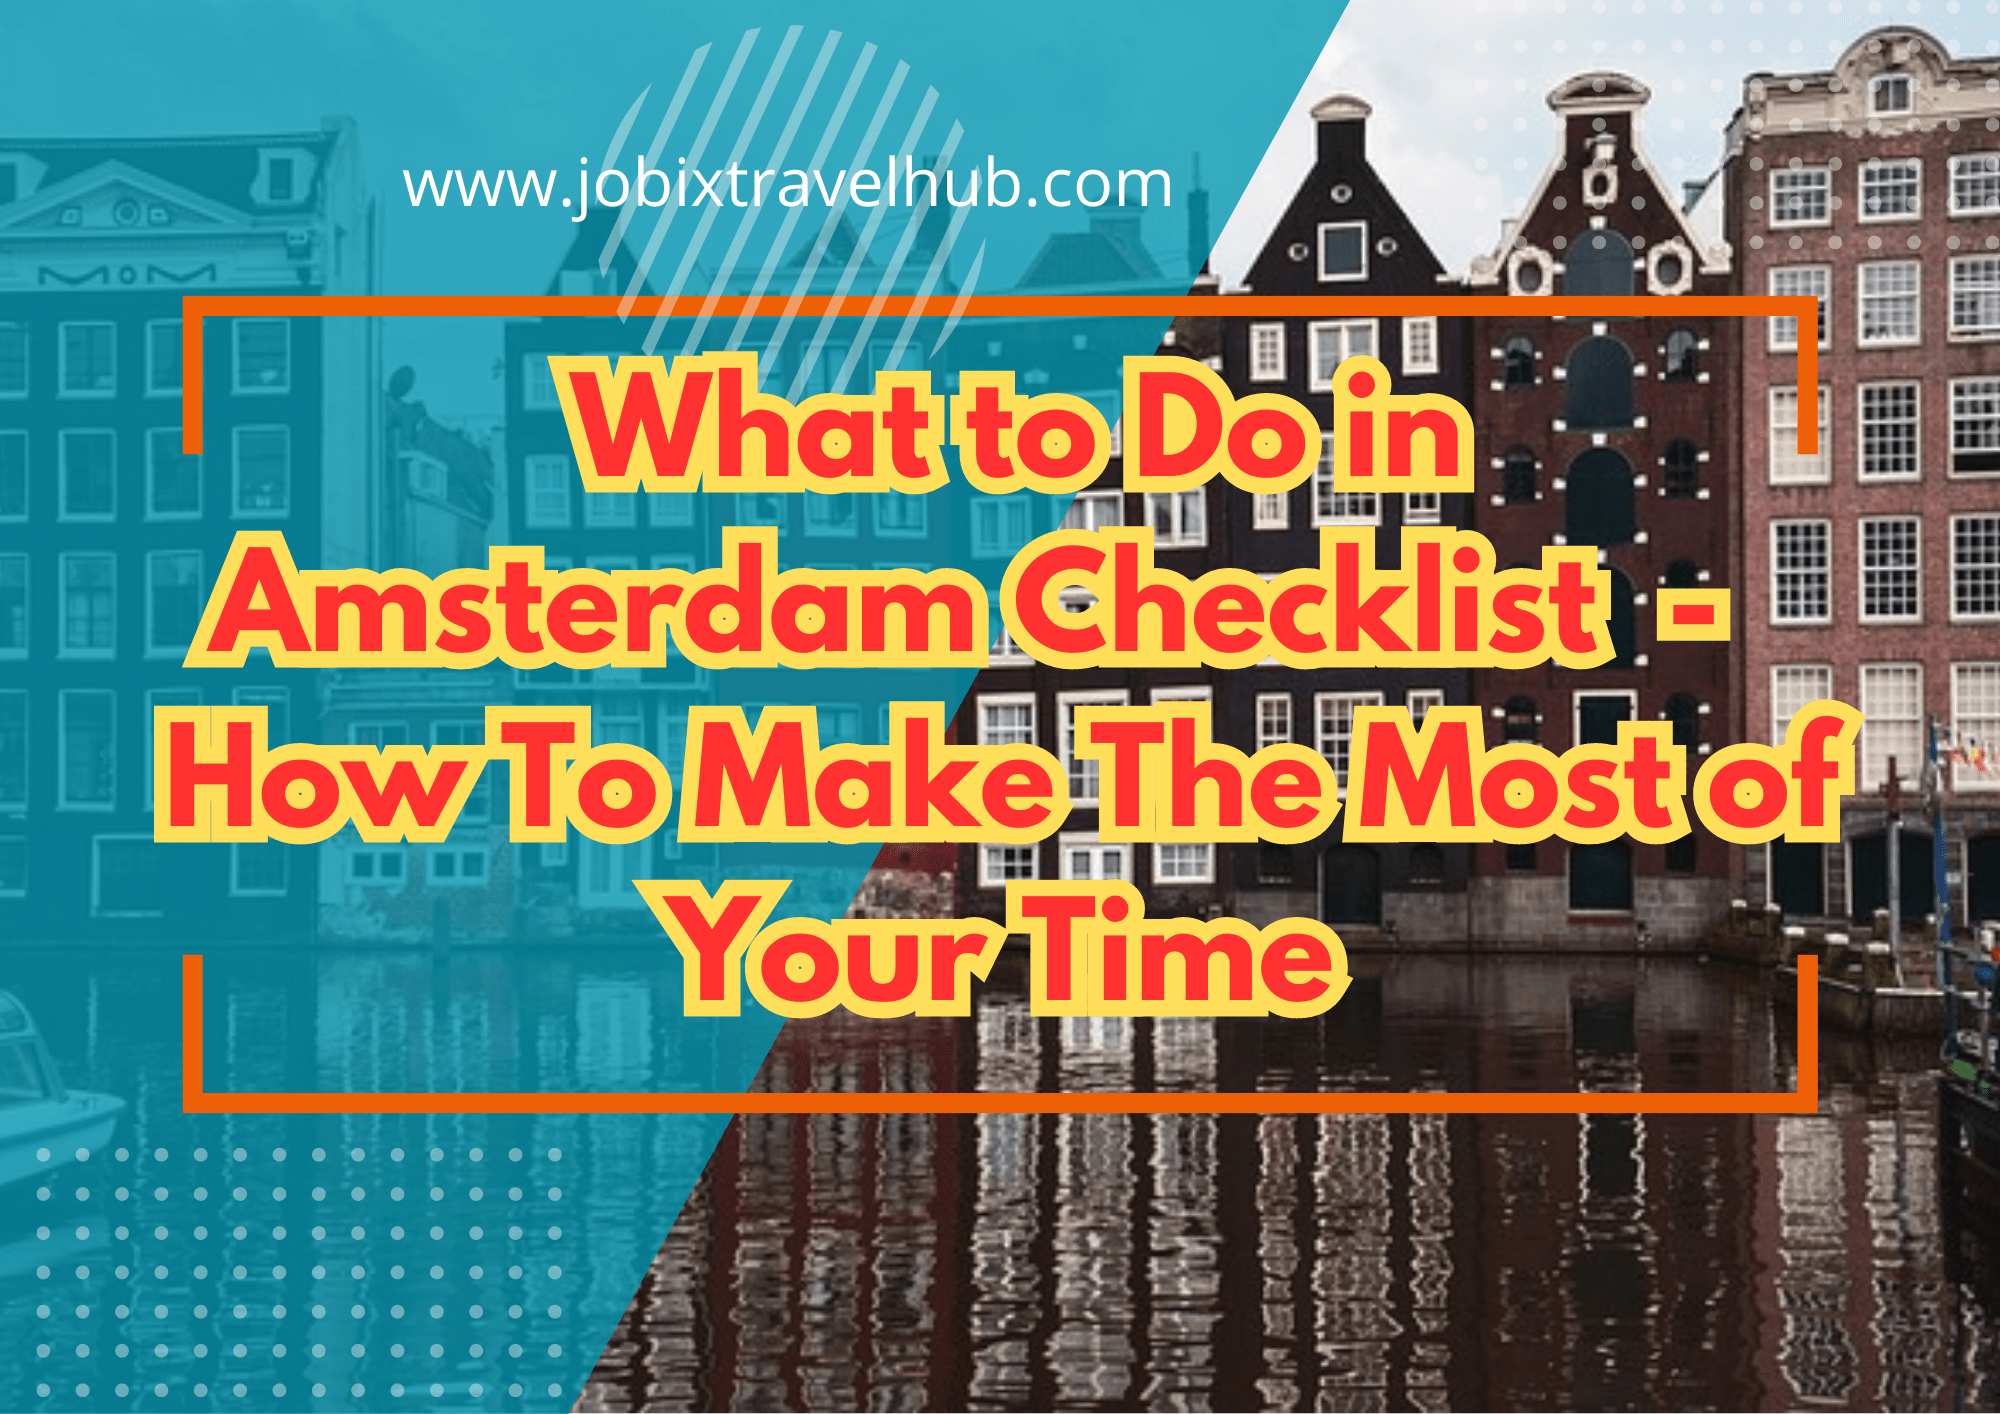 Amsterdam What to Do Checklist - How To Make The Most of Your Time